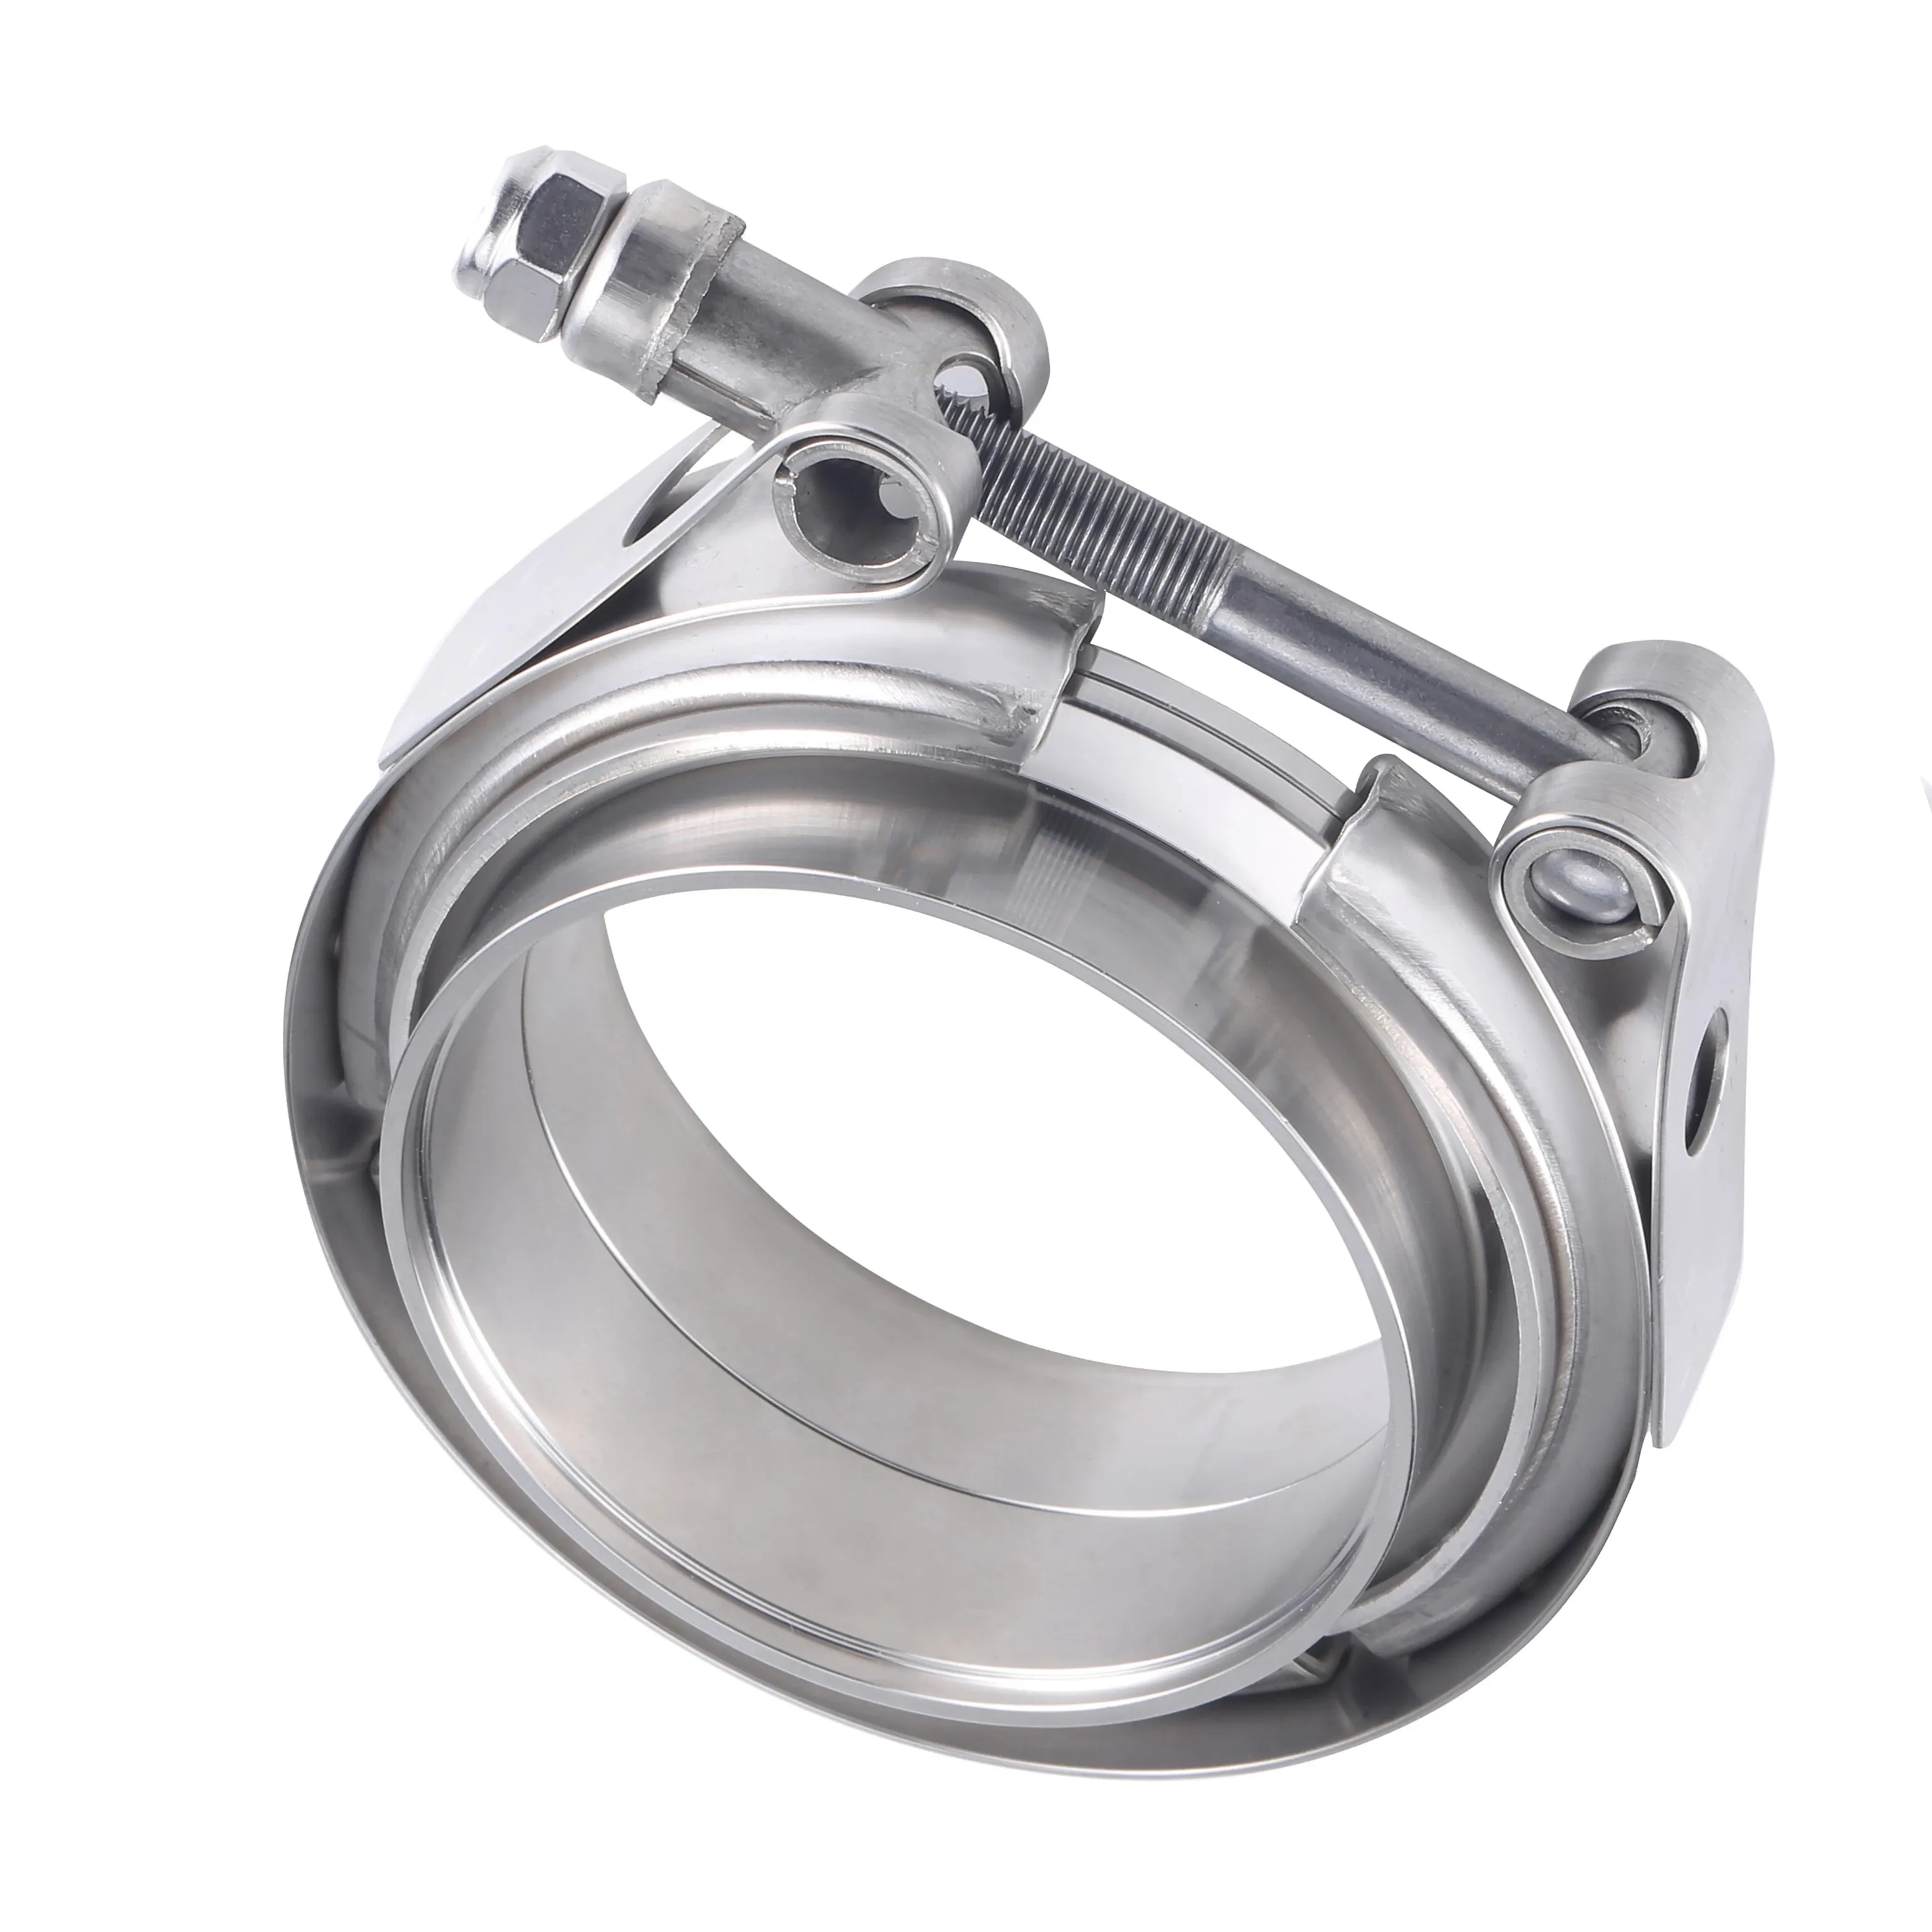 stainless steel hose clamp T bolt V band hose clamps for male and female flanges